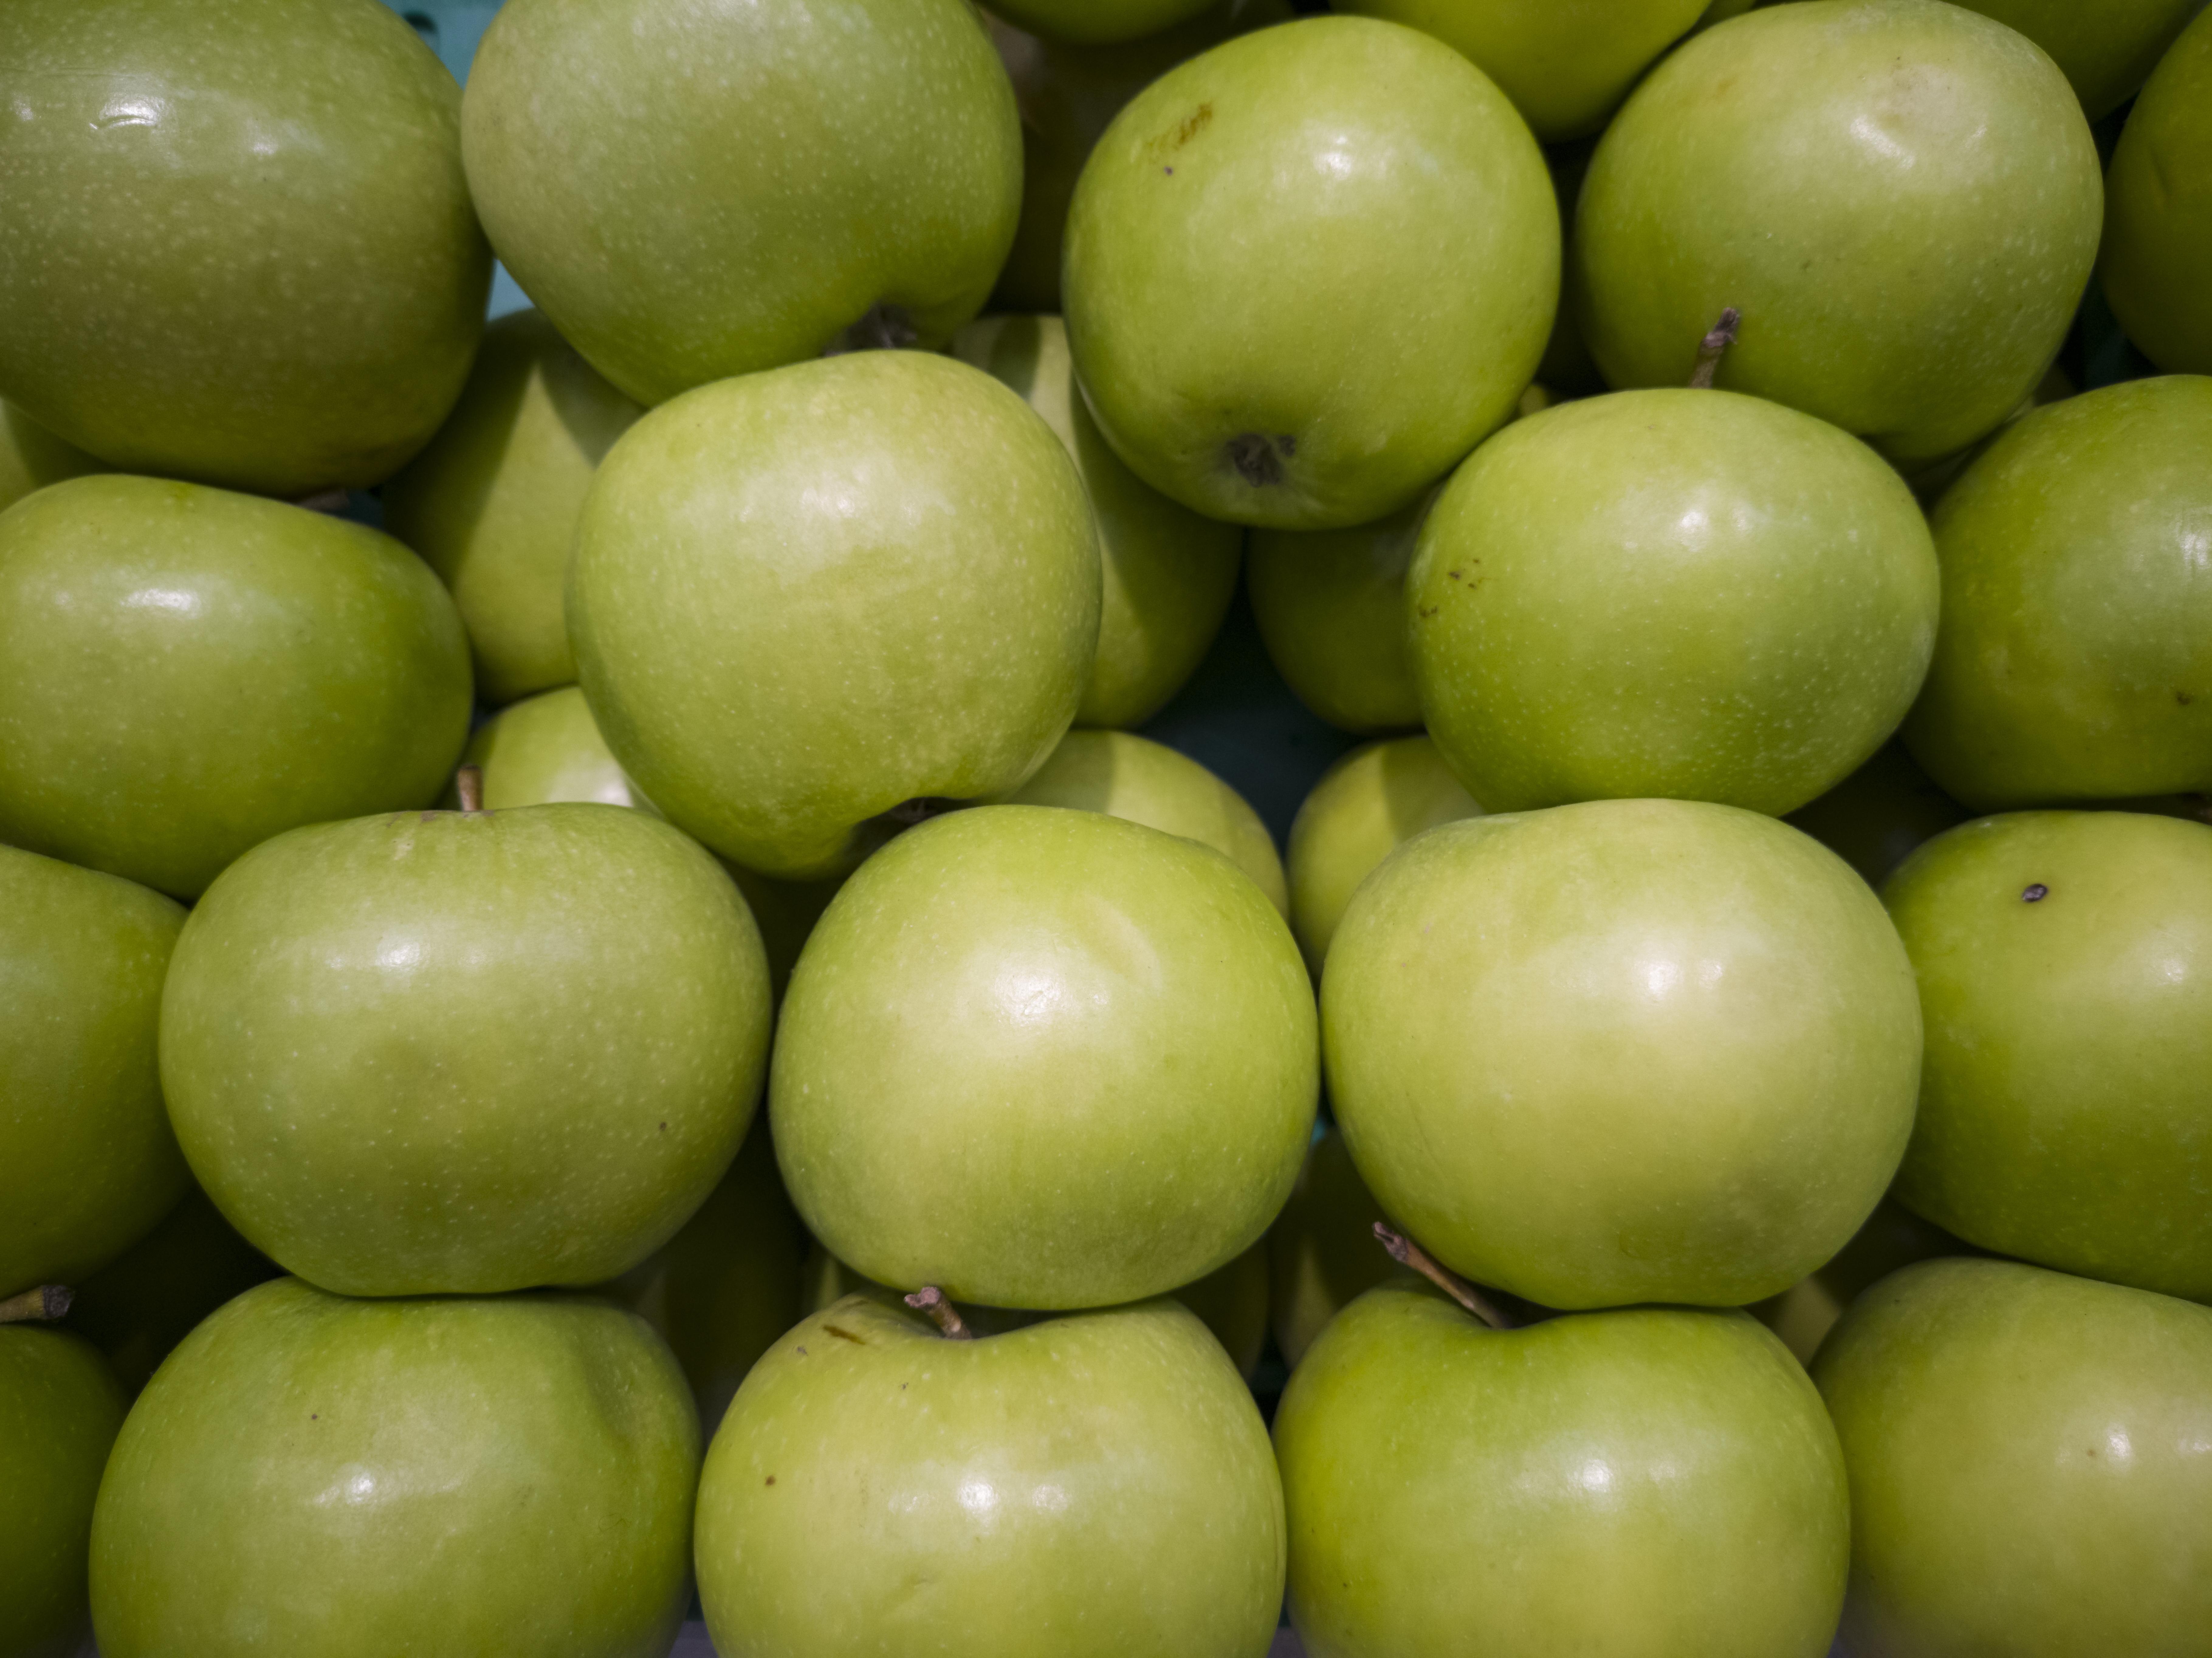 Download 7280x5456 Green Apples, Fresh, Fruits, Nutrition